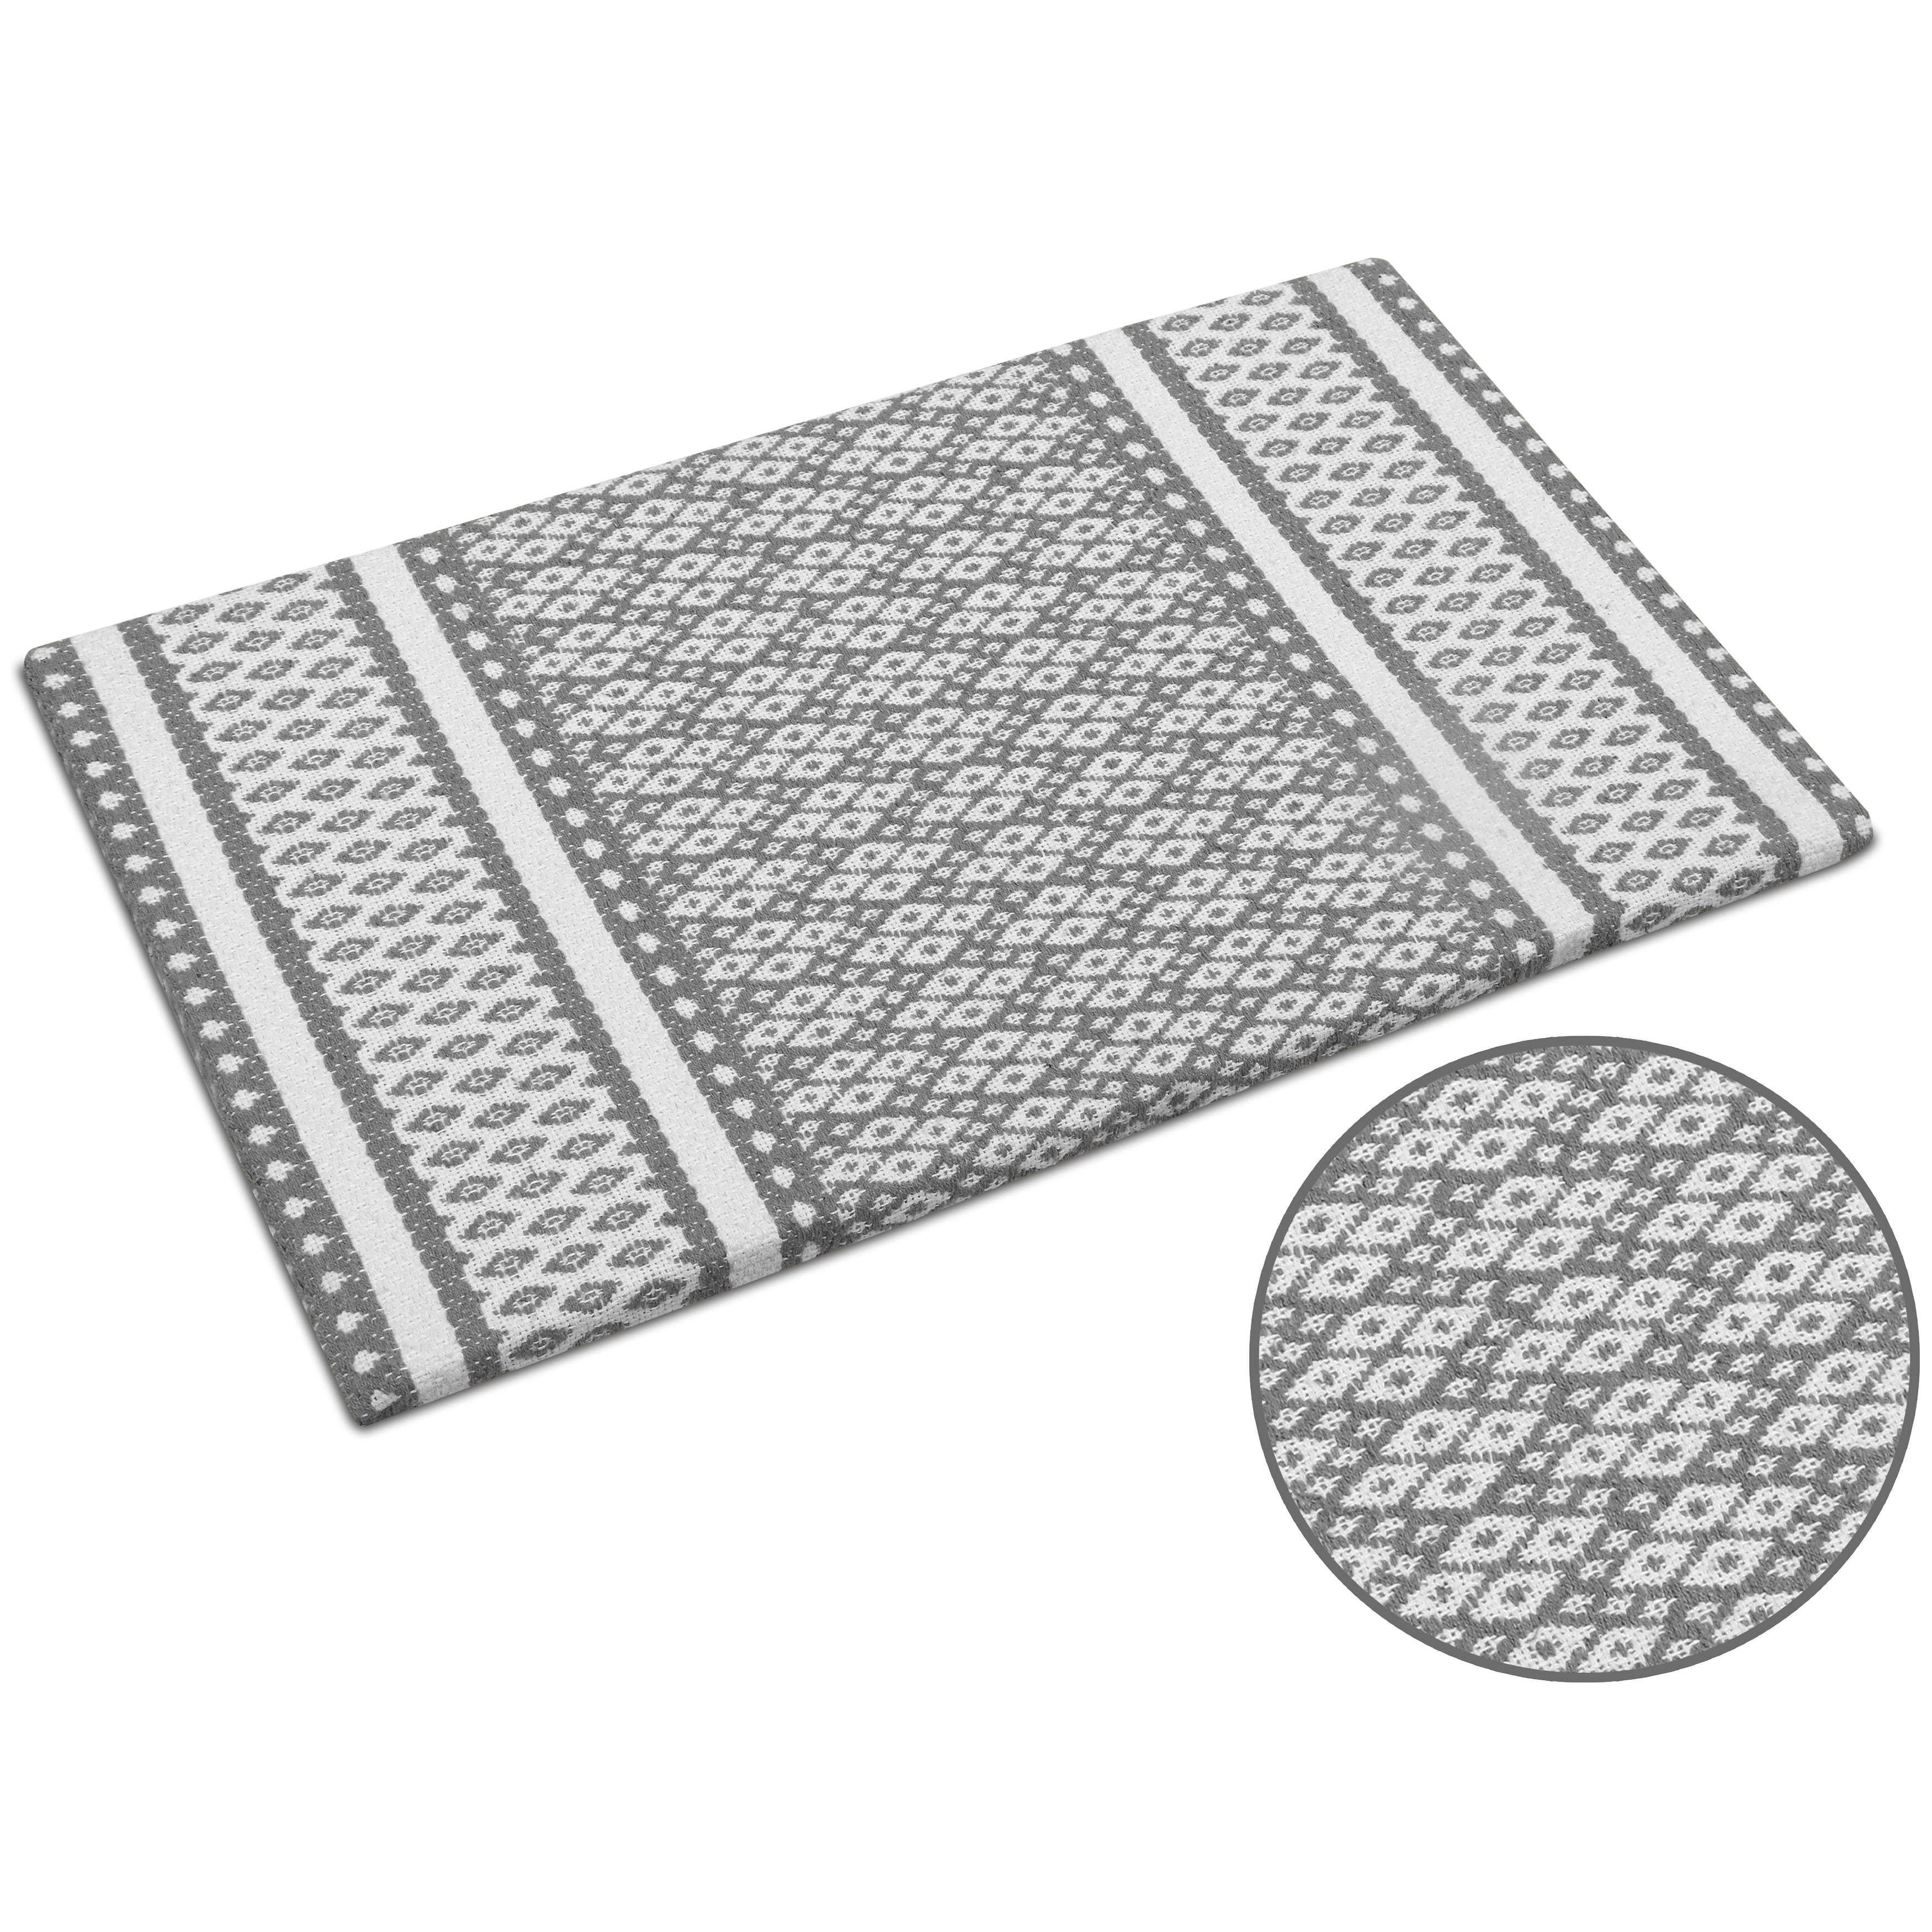 https://ak1.ostkcdn.com/images/products/is/images/direct/0ac9f45f71858379d8b2d922b016c0ea39eab05d/Cotton-Kitchen-Mat-Cushioned-Anti-Fatigue-Rug%2C-Non-Slip-Mats-Comfort-Foam-Rug-for-Kitchen%2C-Office%2C-Sink%2C-Laundry---18%27%27x30%27%27.jpg